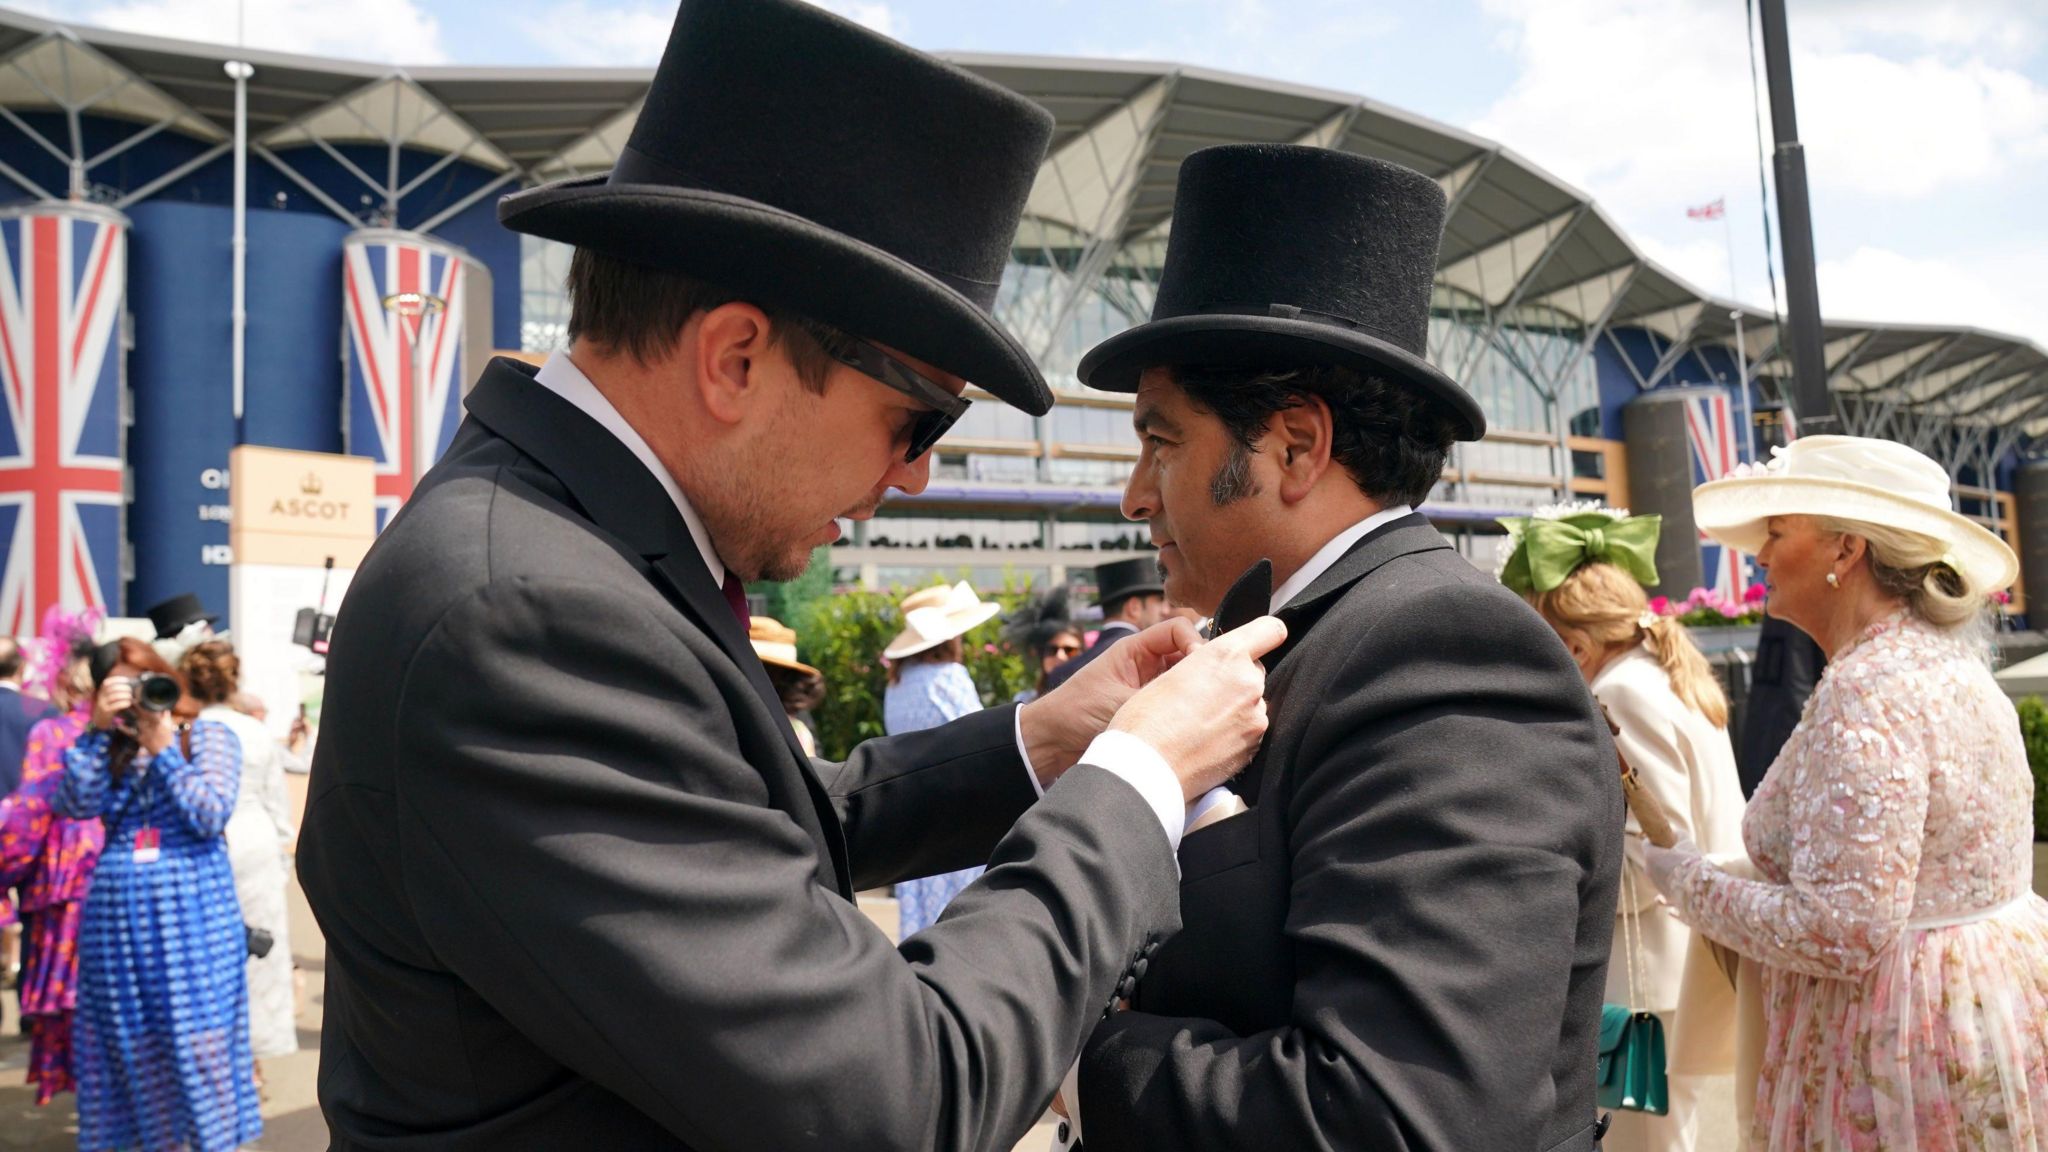 A man in a suit and top hat adjusts the pocket square of another man, with the Ascot Racecourse building in the background